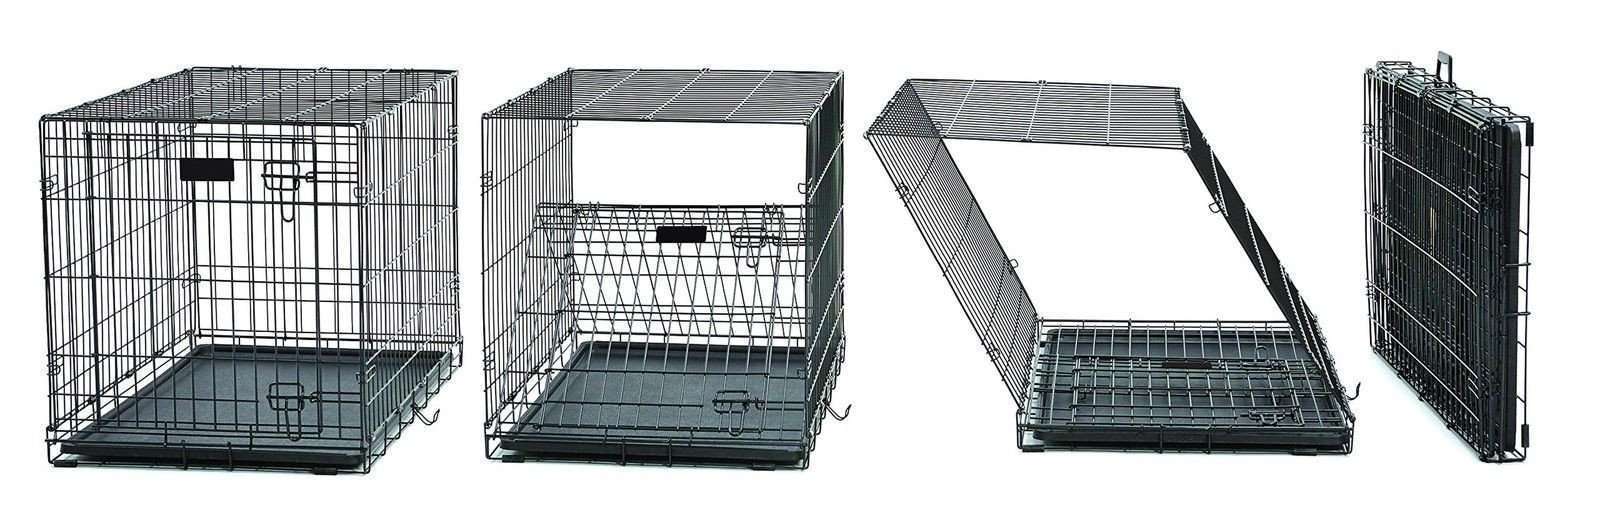 Midwest Icrate Pet Crates Single Door 18-Inch W/Divider Midwest Homes For Pets - $24.95